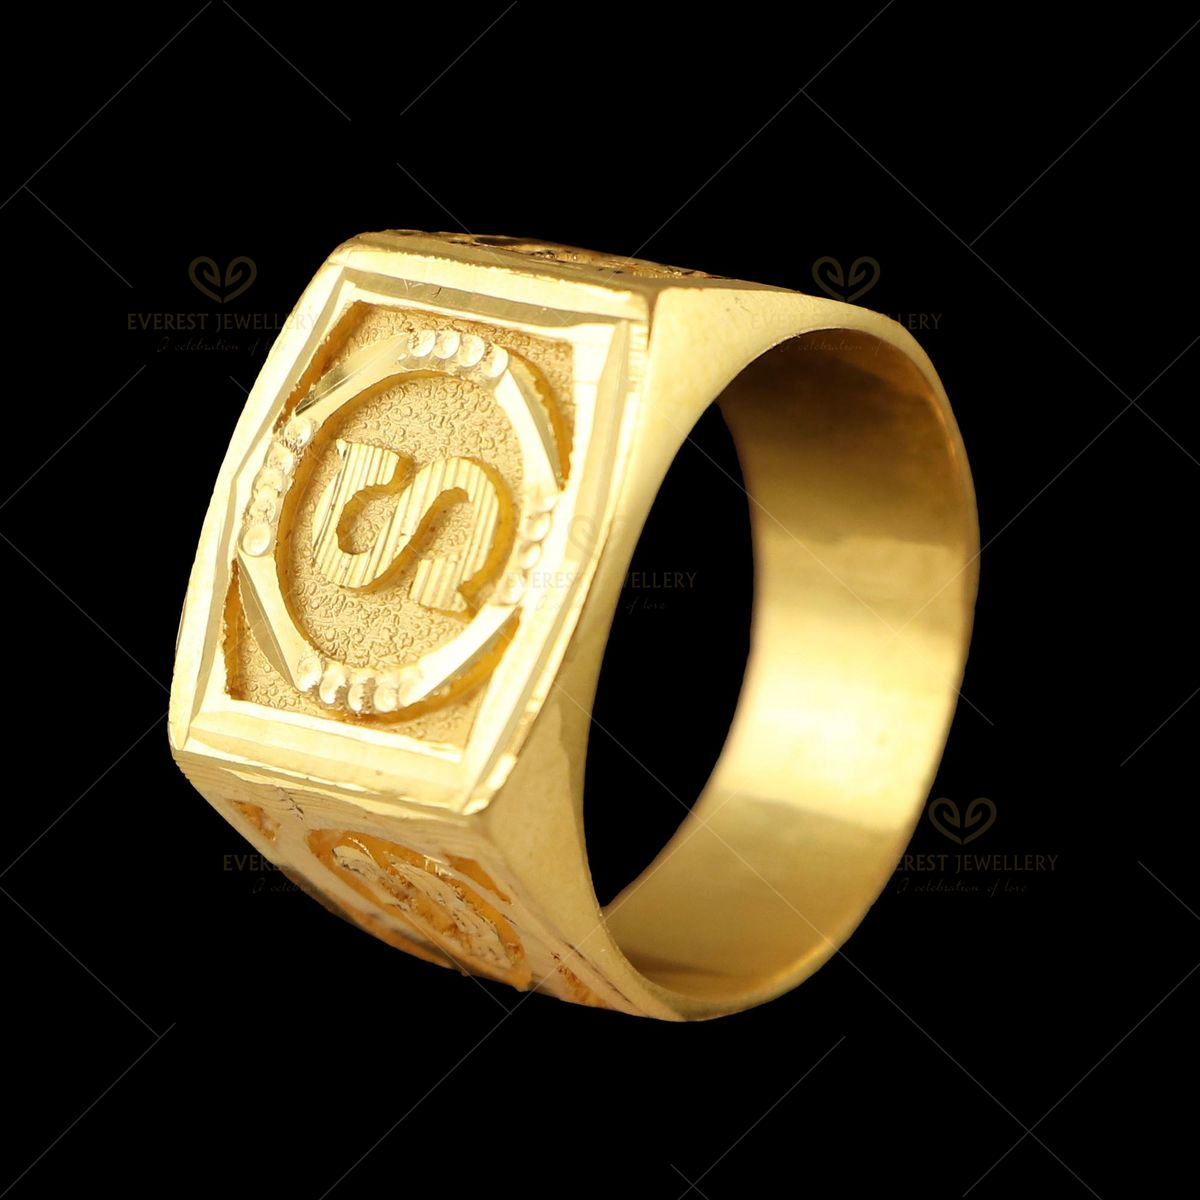 Gold G Letter Ring Design Weight And Price||Gold Letter Ring Model||Mens  Ring|By Gold Lakshmi Balaji - YouTube